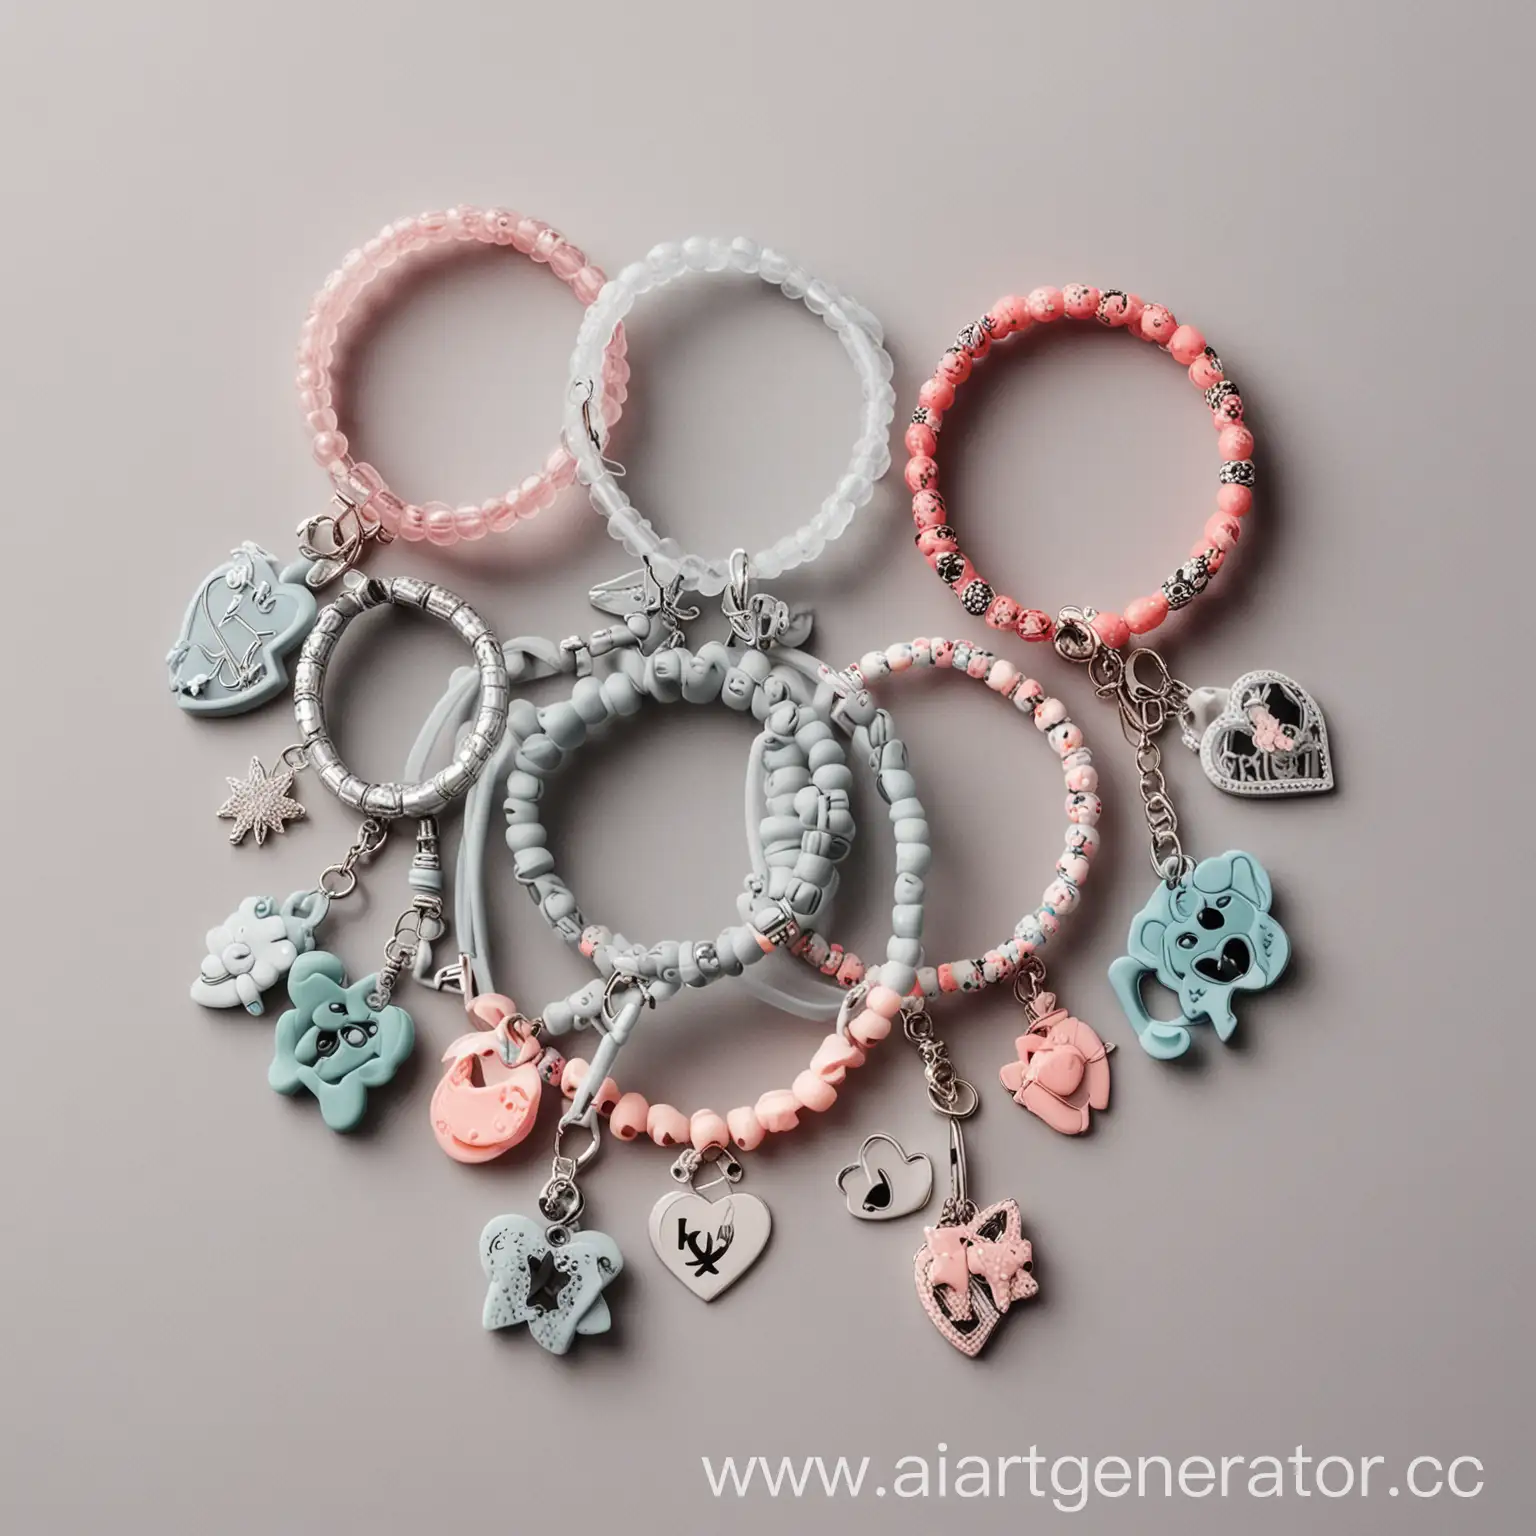 Colorful-Silicone-Bracelets-and-Charms-on-Light-Gray-Background